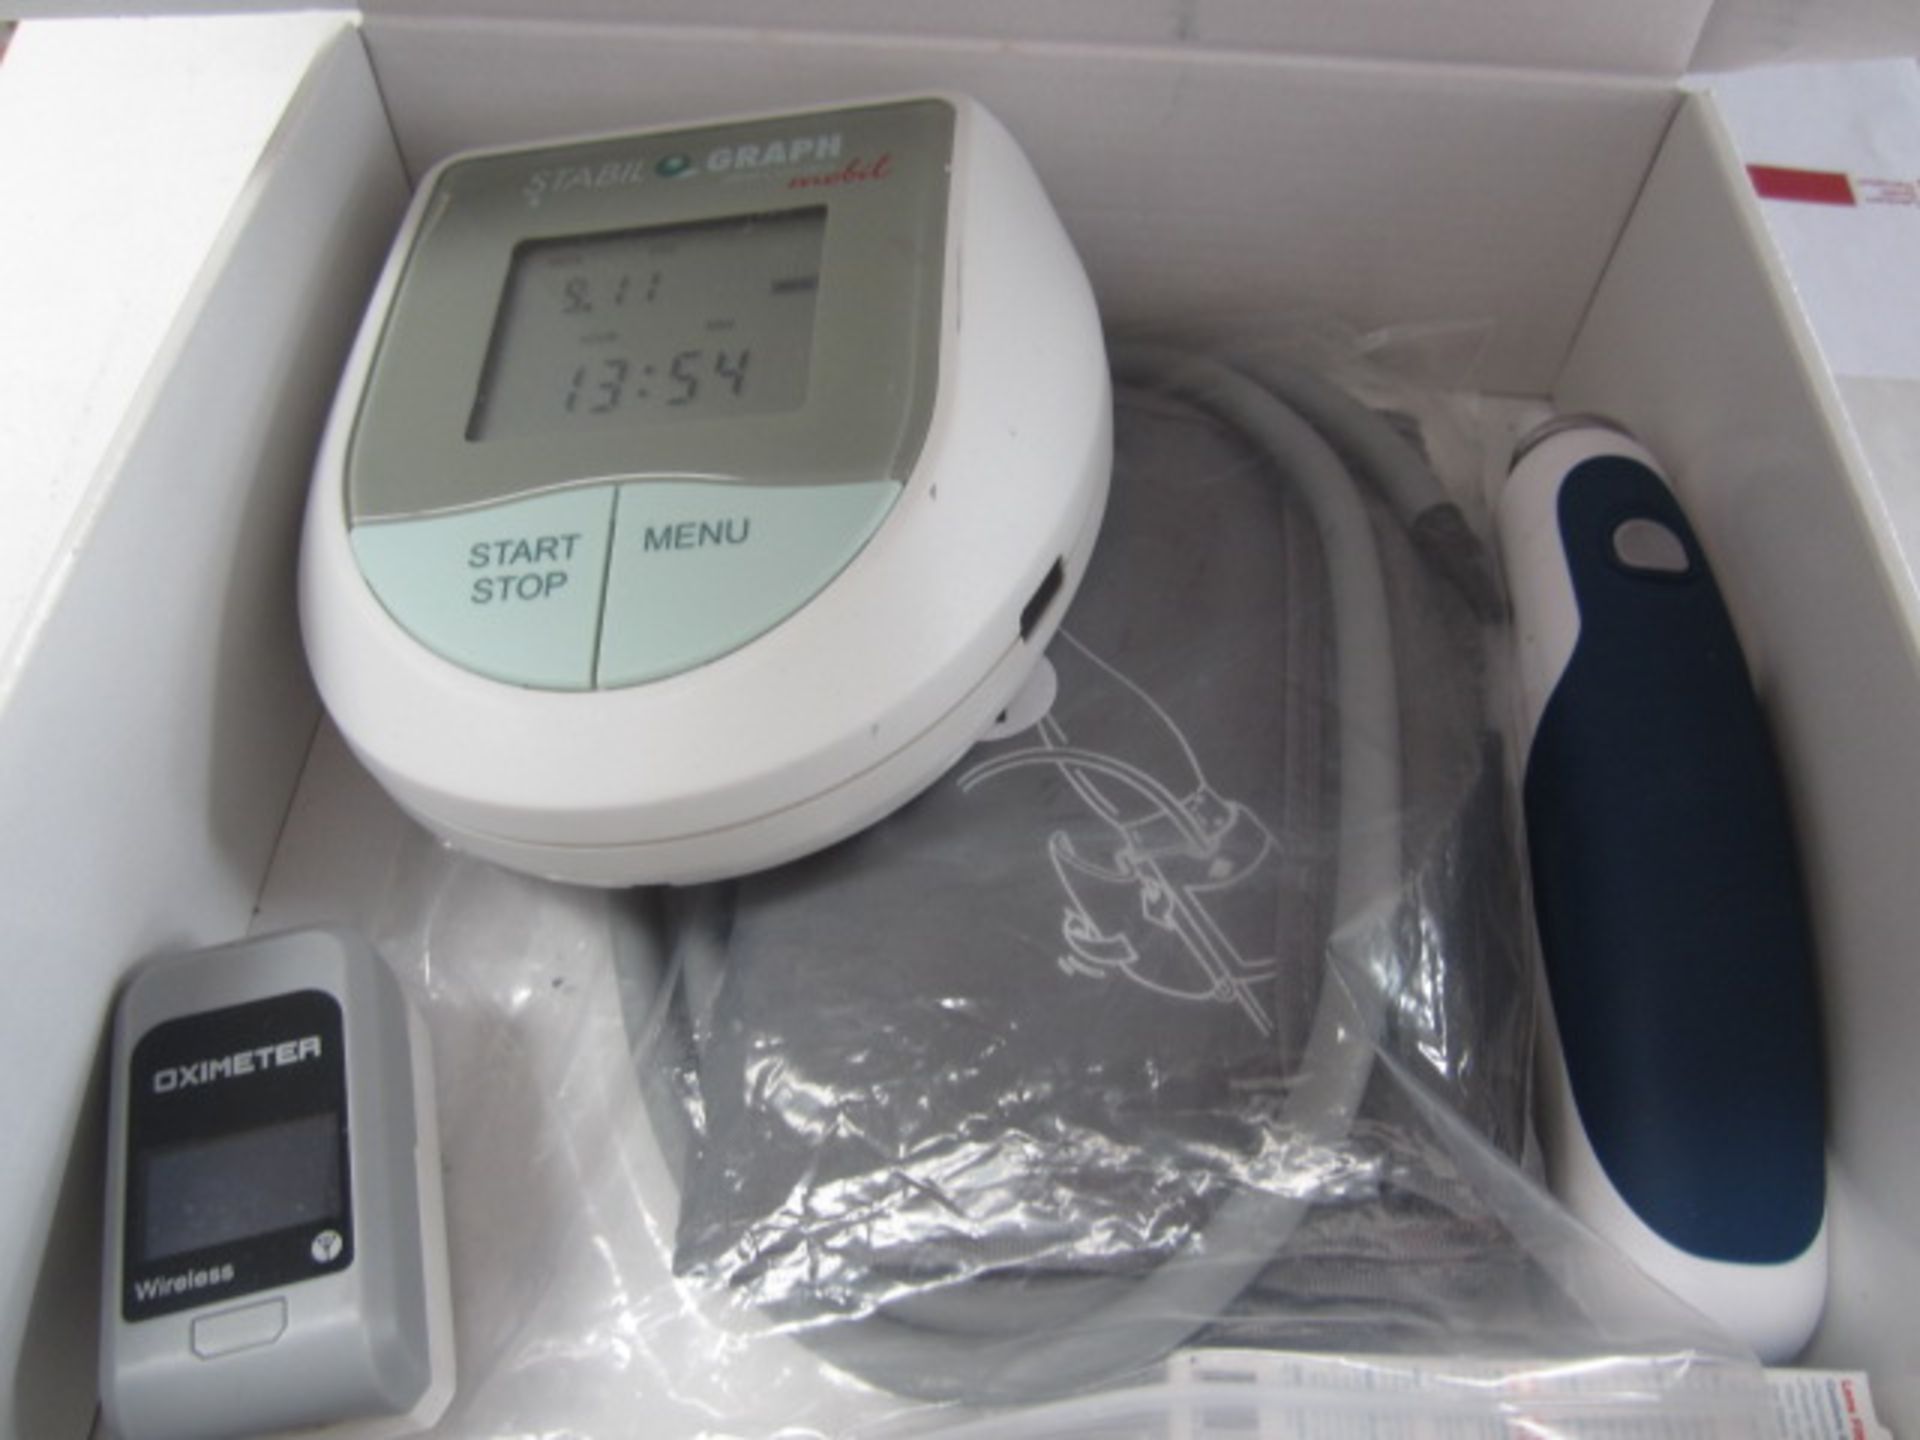 5 x Stabilograph SBPM blood pressure monitor, 5 x Lever TD-1261 ear thermometer, 5 x finger tip - Image 2 of 3